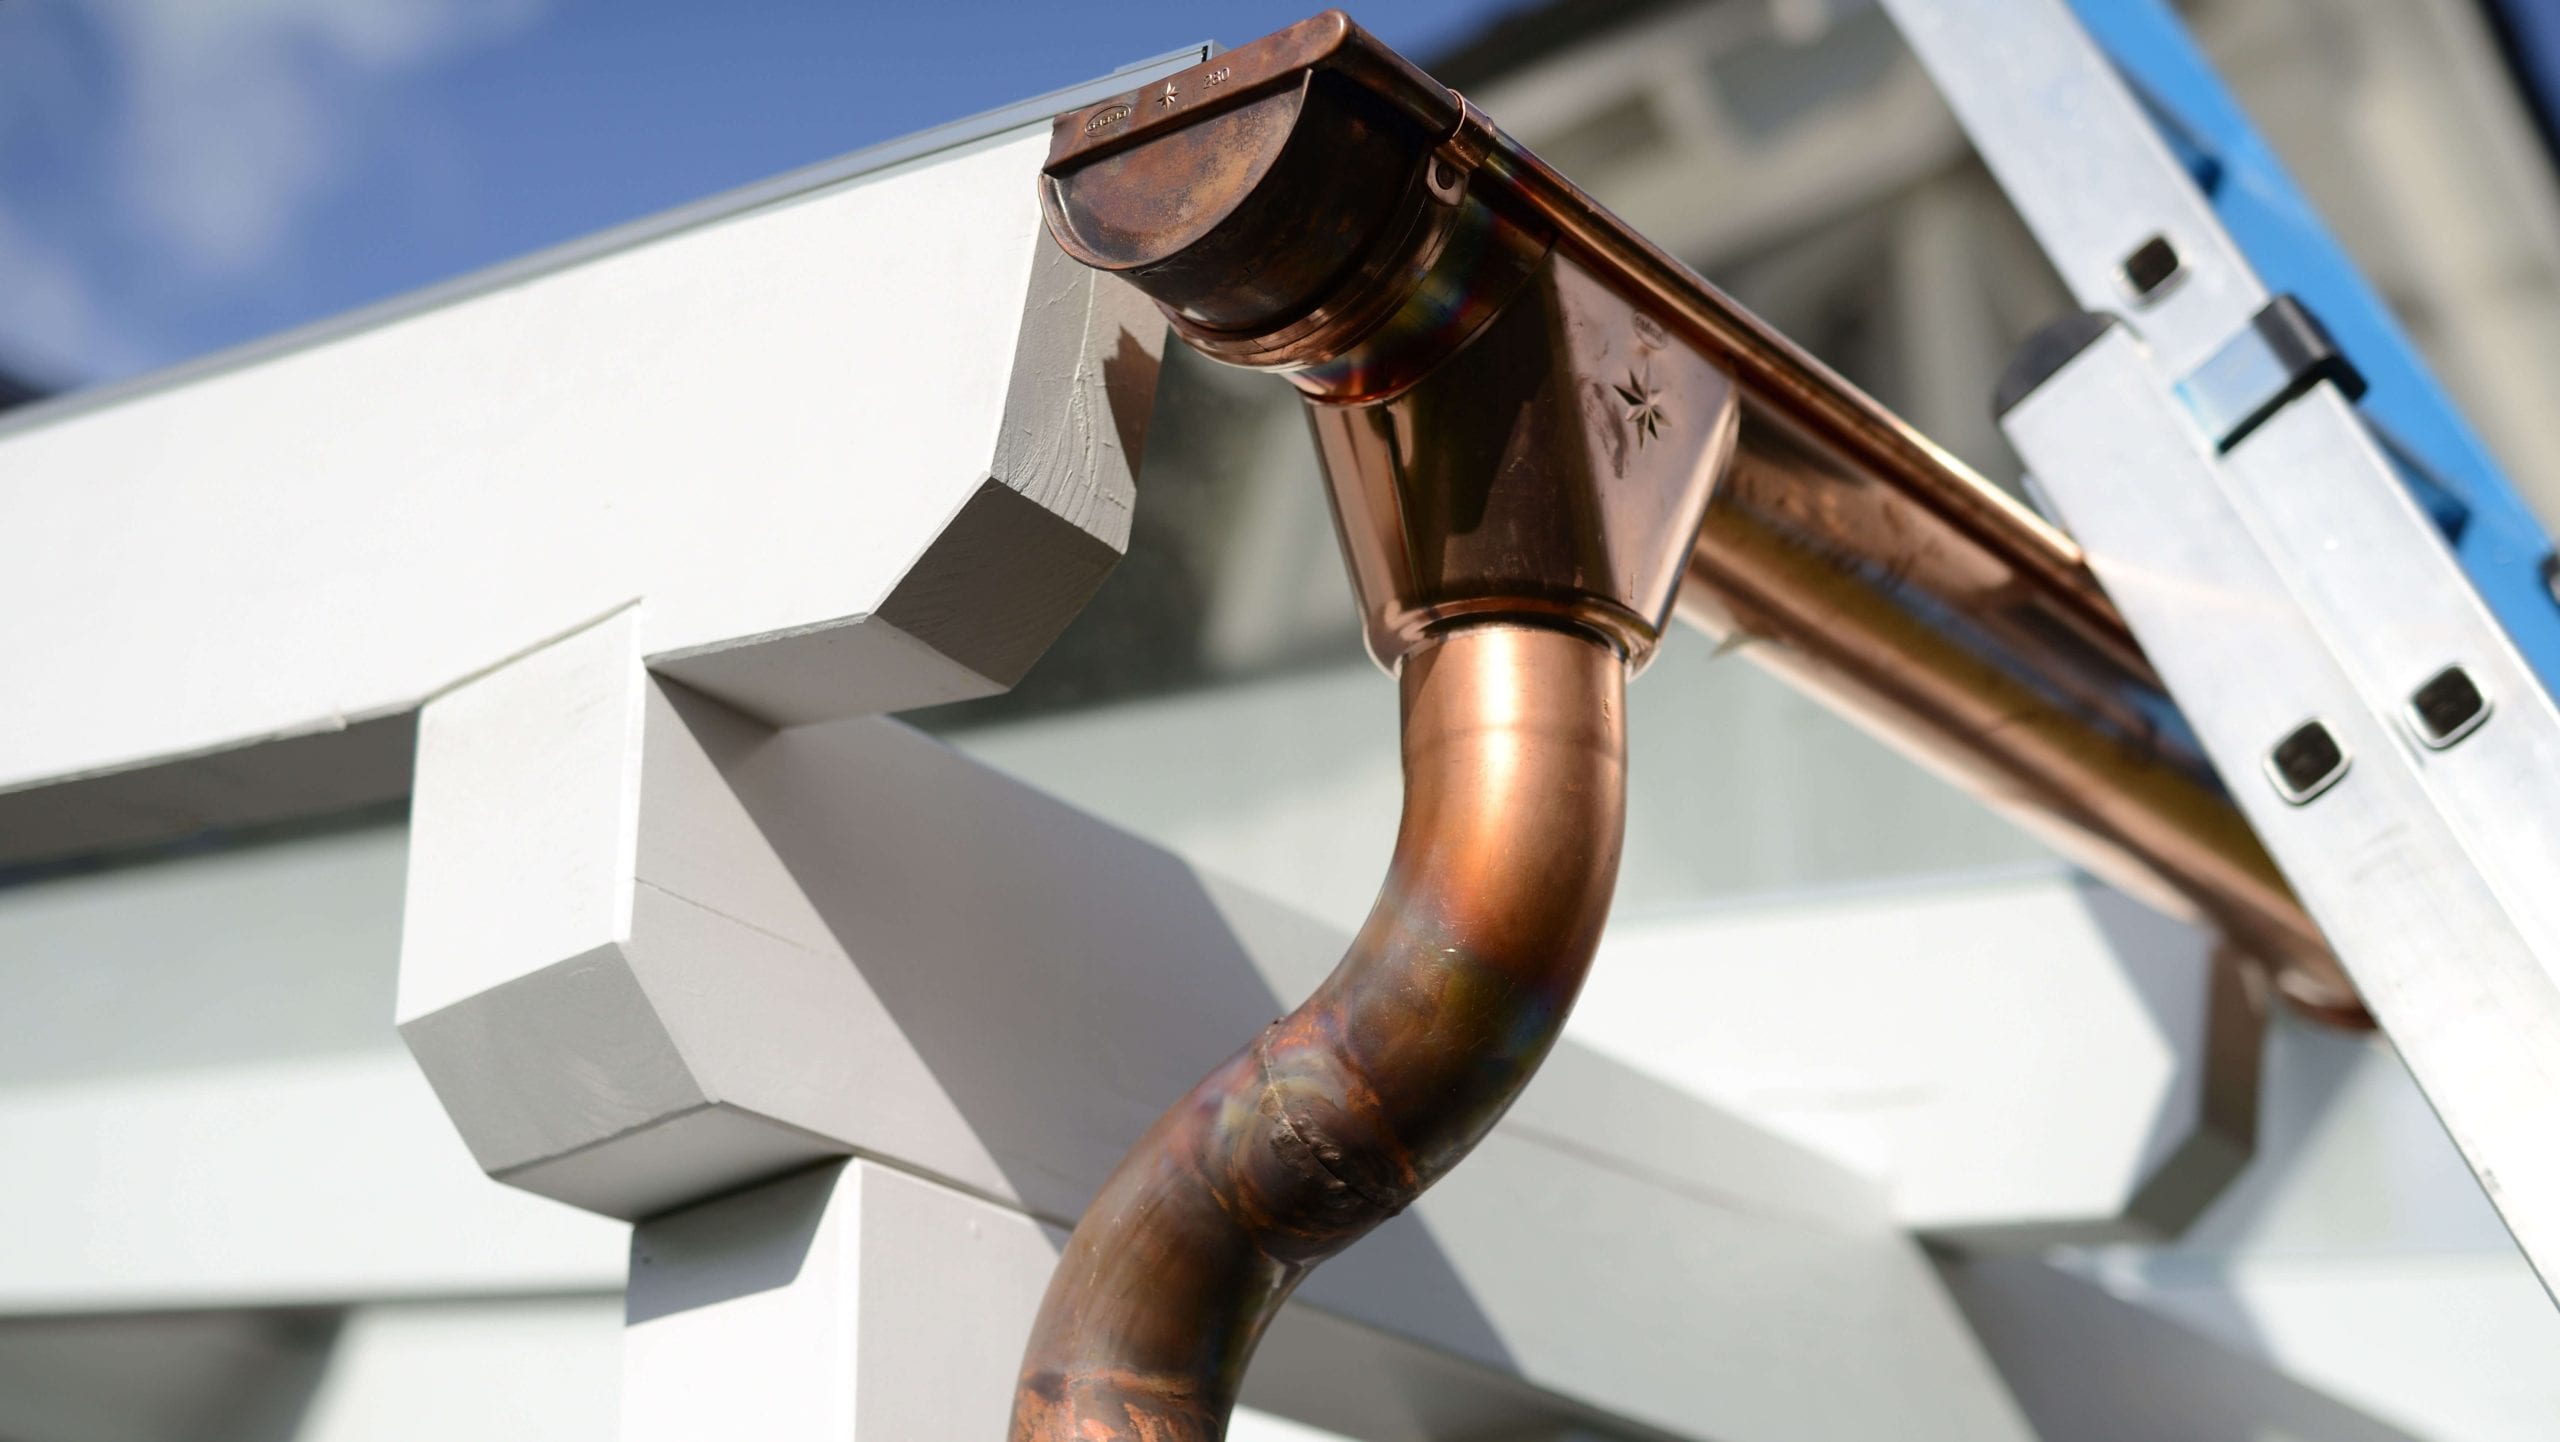 Make your property stand out with copper gutters. Contact for gutter installation in Memphis